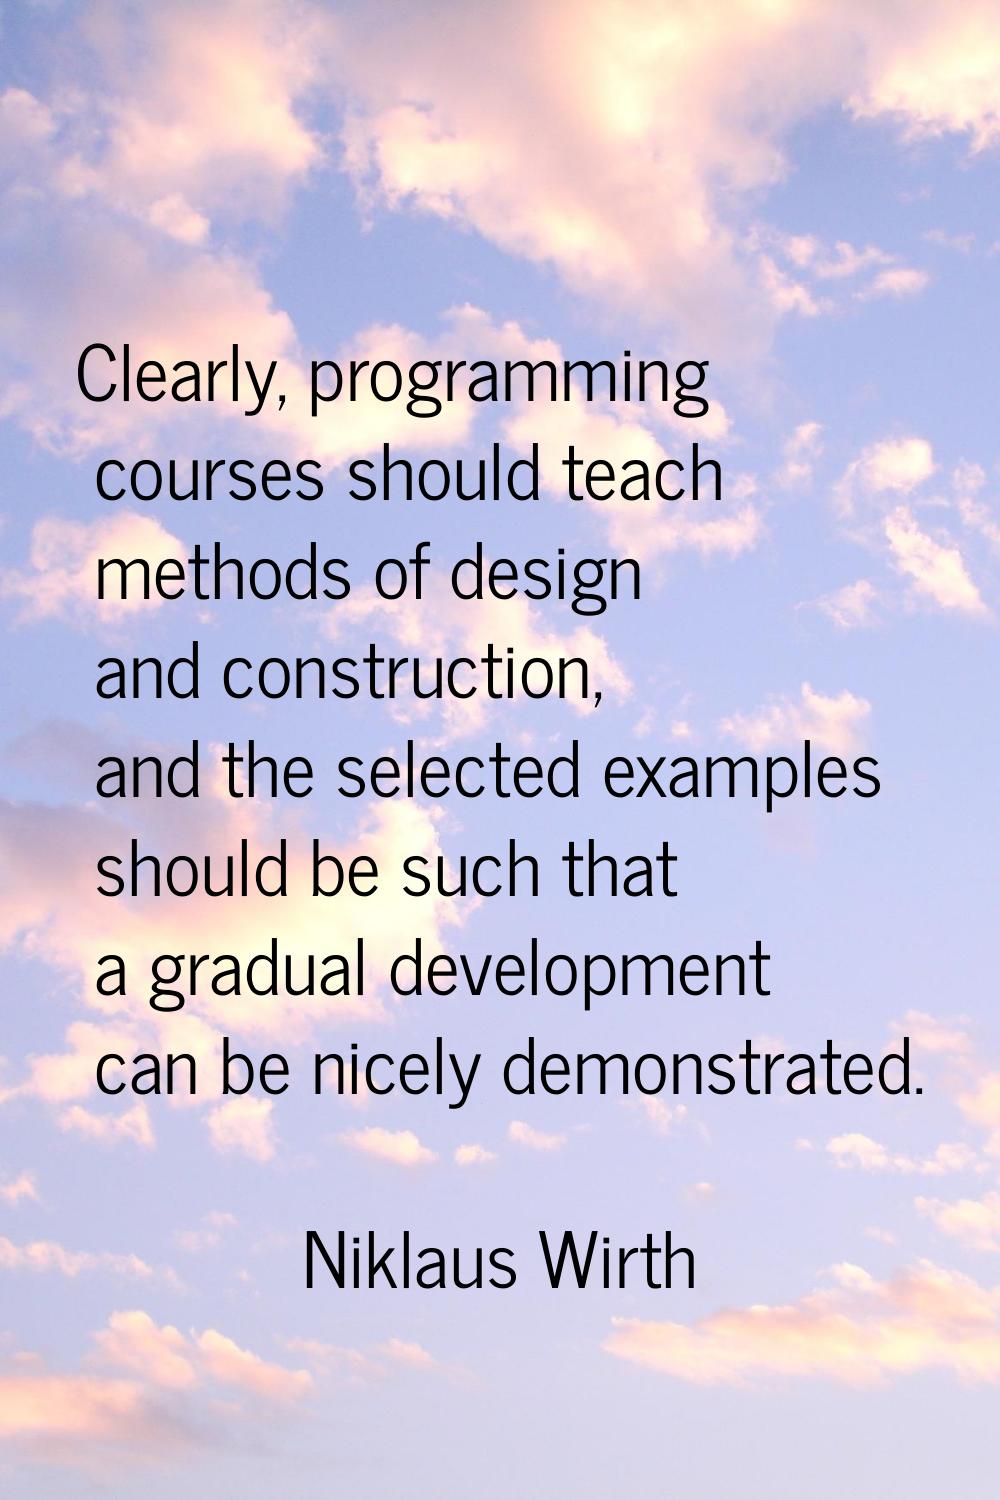 Clearly, programming courses should teach methods of design and construction, and the selected exam